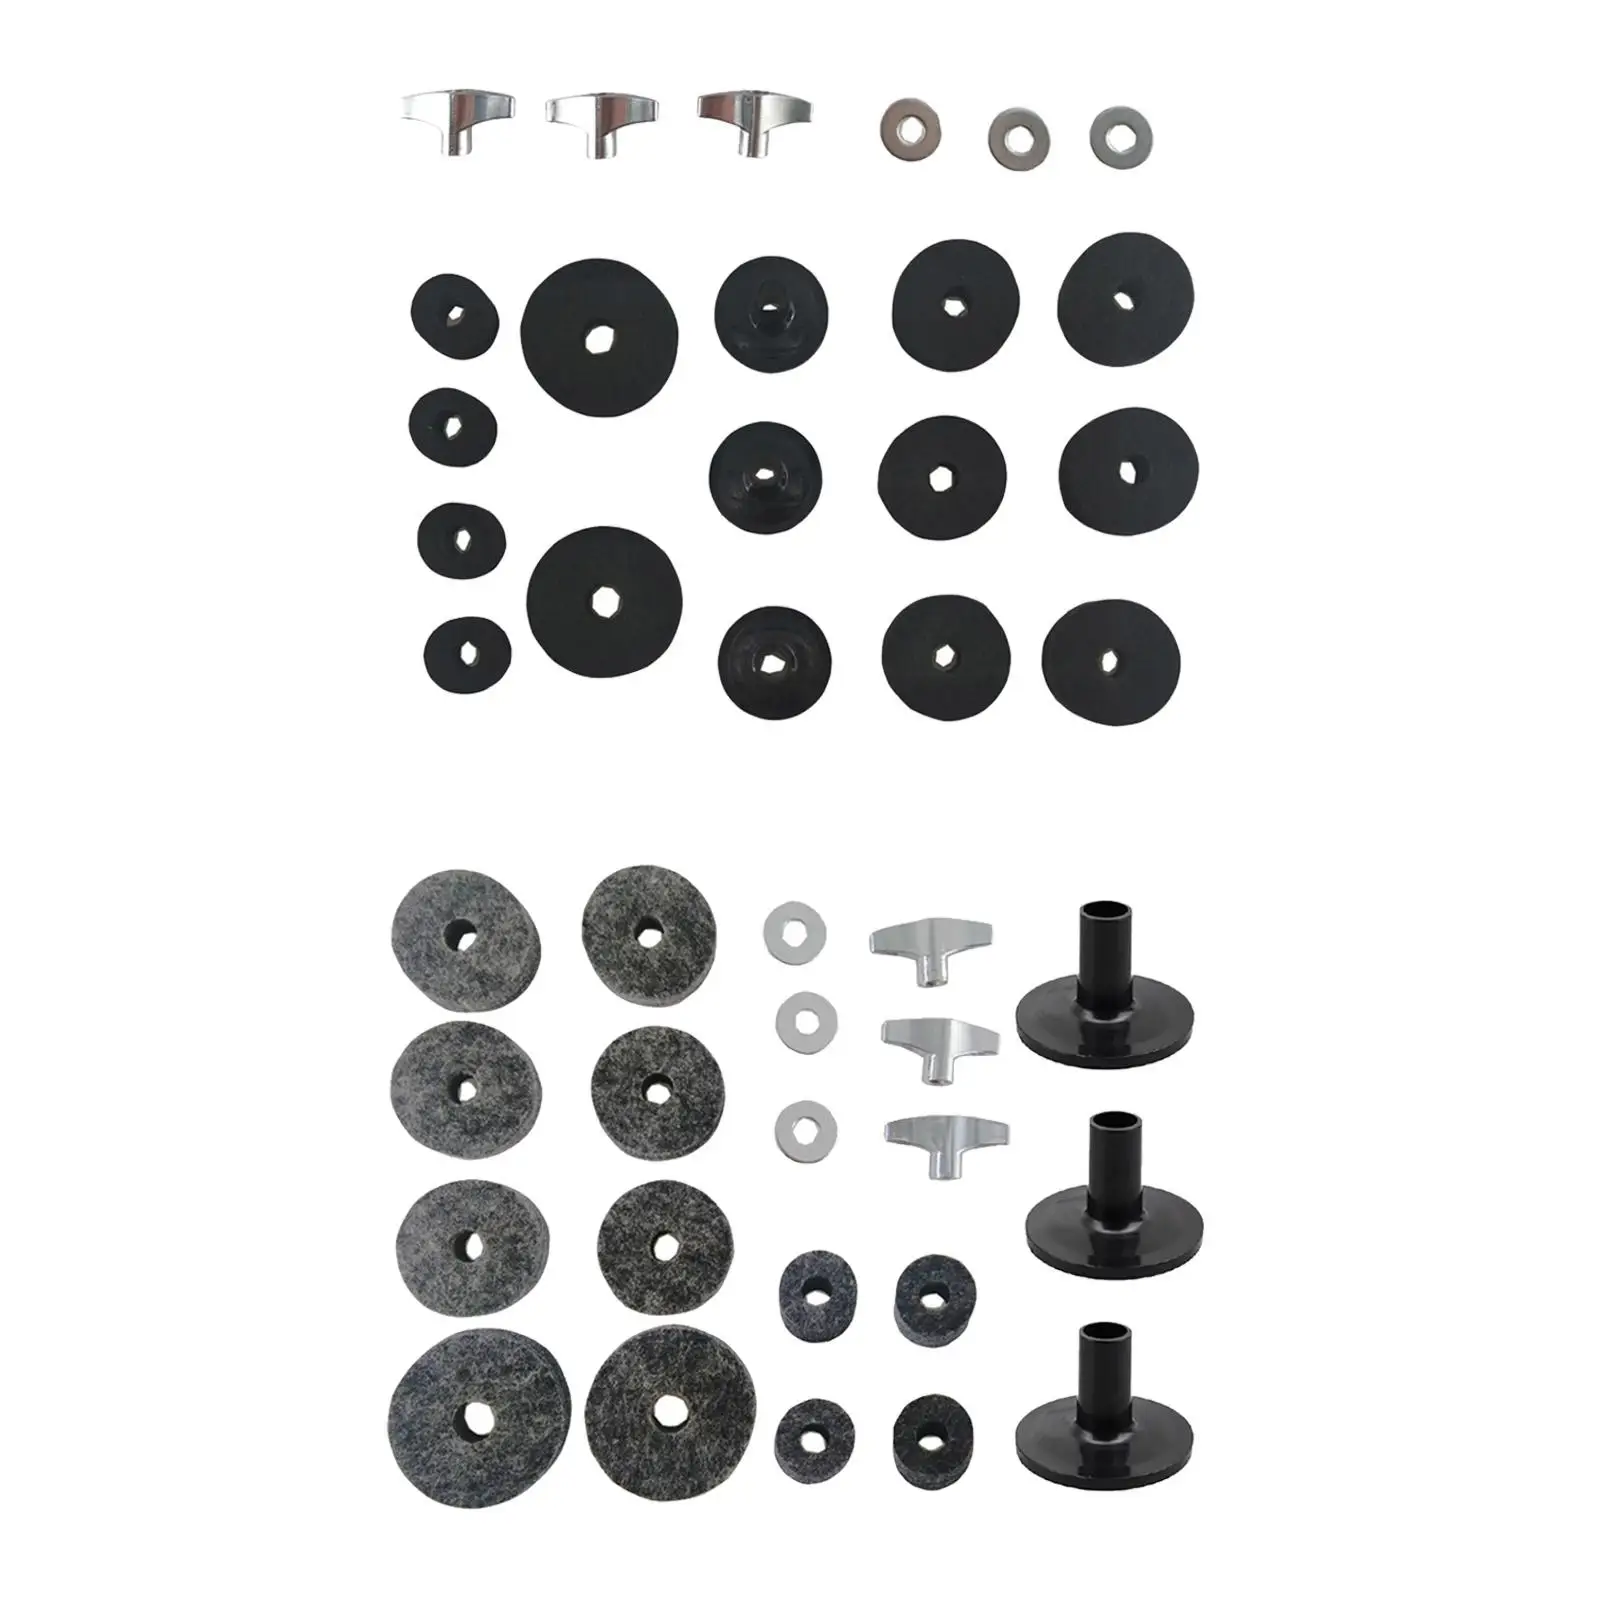 21x Replacement Cymbal Felt Washer Cymbal Washer Replacement Kit Cymbal Replacement Wing Nuts Attachment Drum Sets Replacement